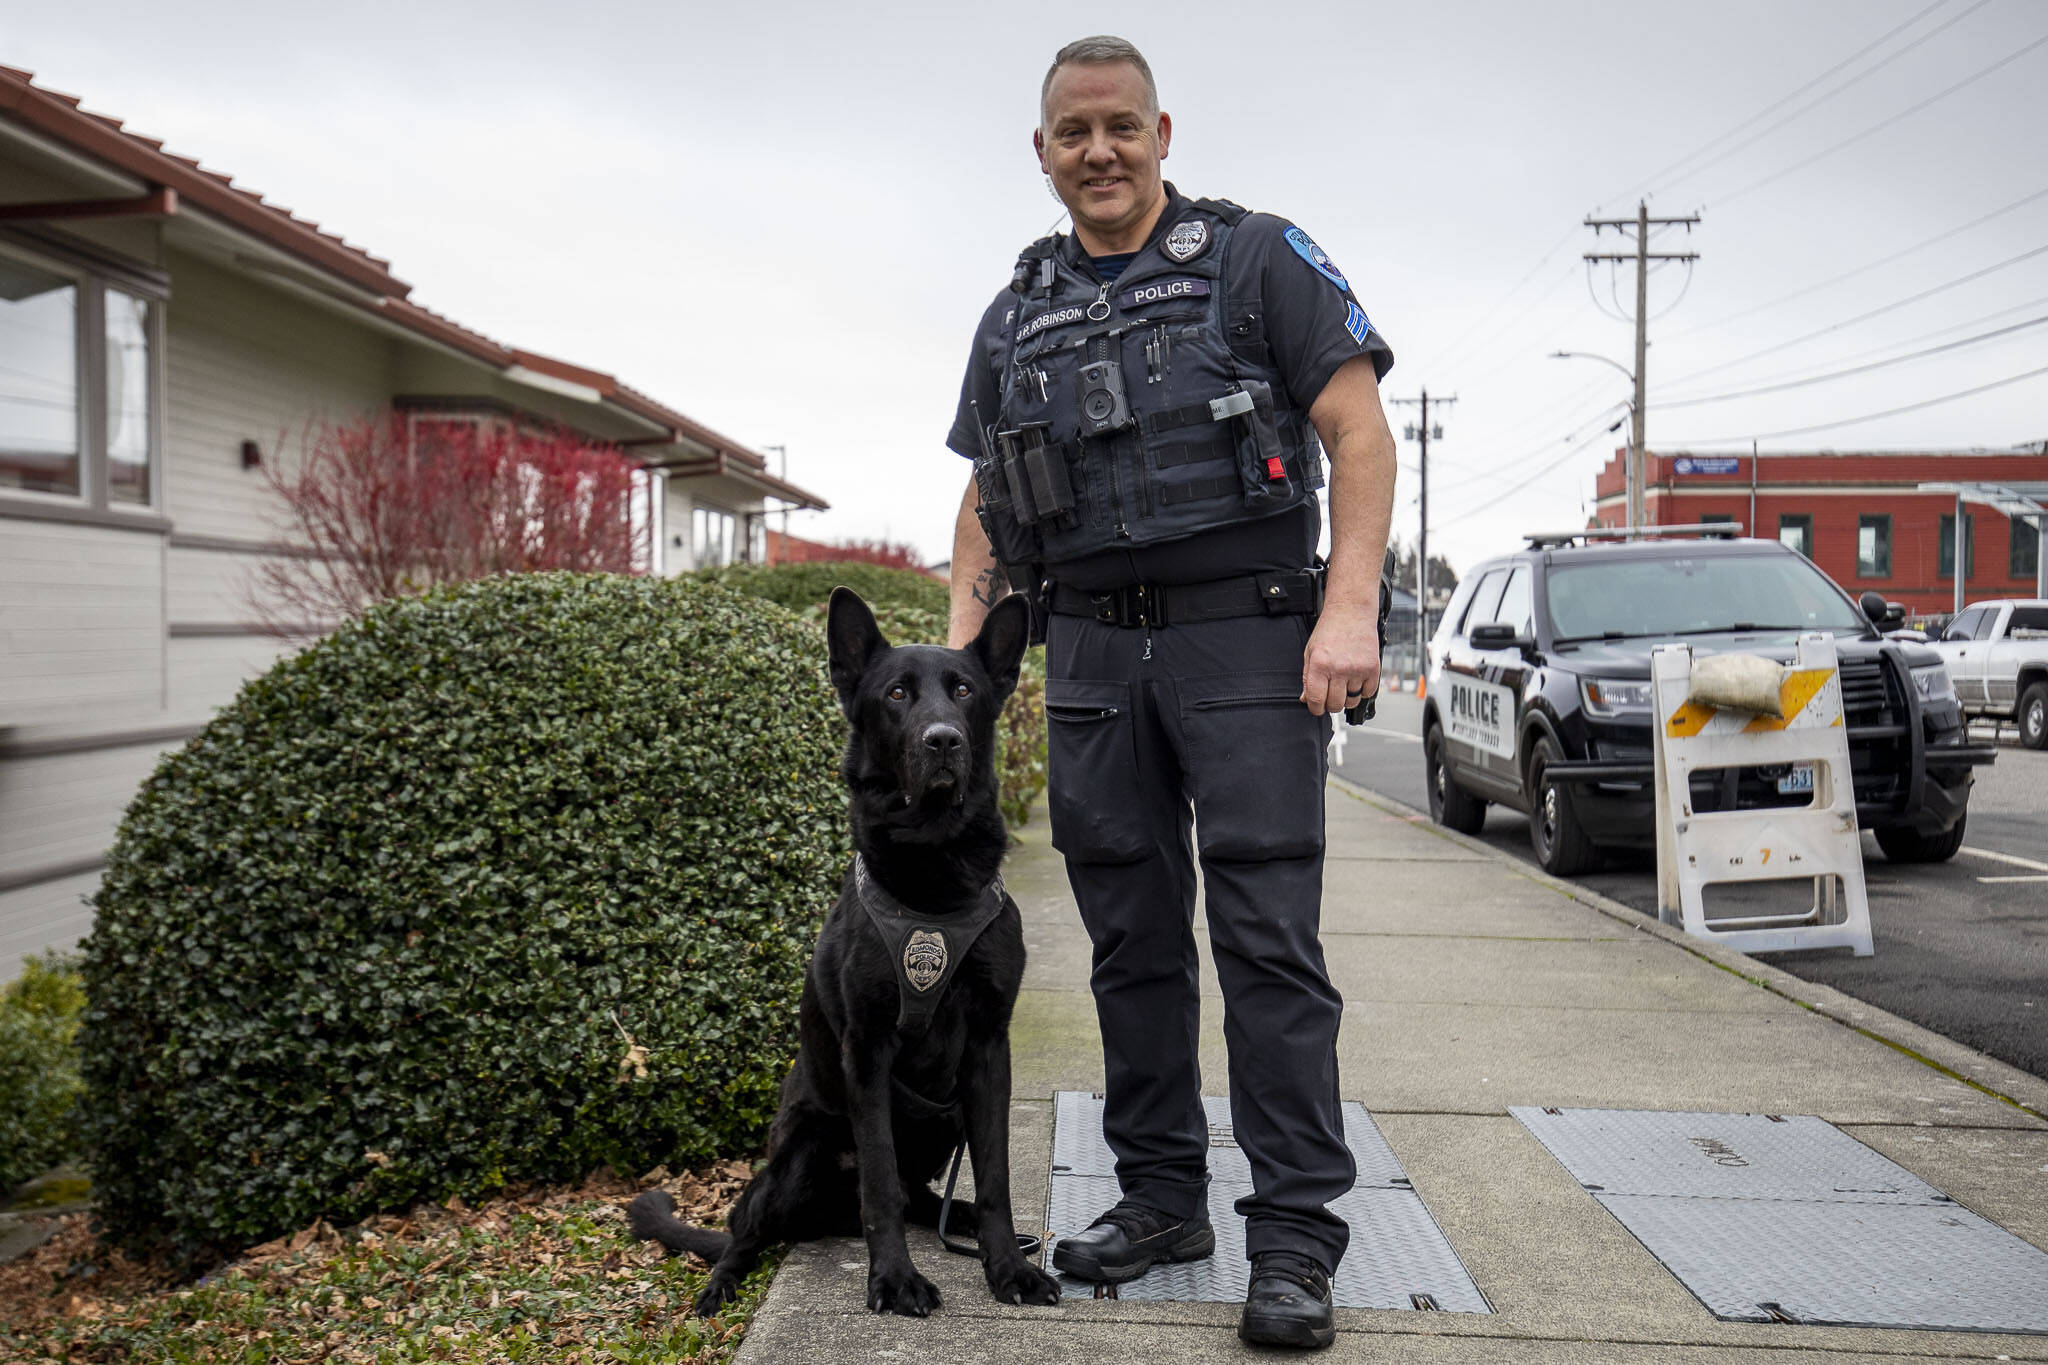 K-9 Hobbs and Sgt. Jason Robinson after Hobbs’ retirement ceremony at the Edmonds Police Department on Thursday in Edmonds. (Annie Barker / The Herald)